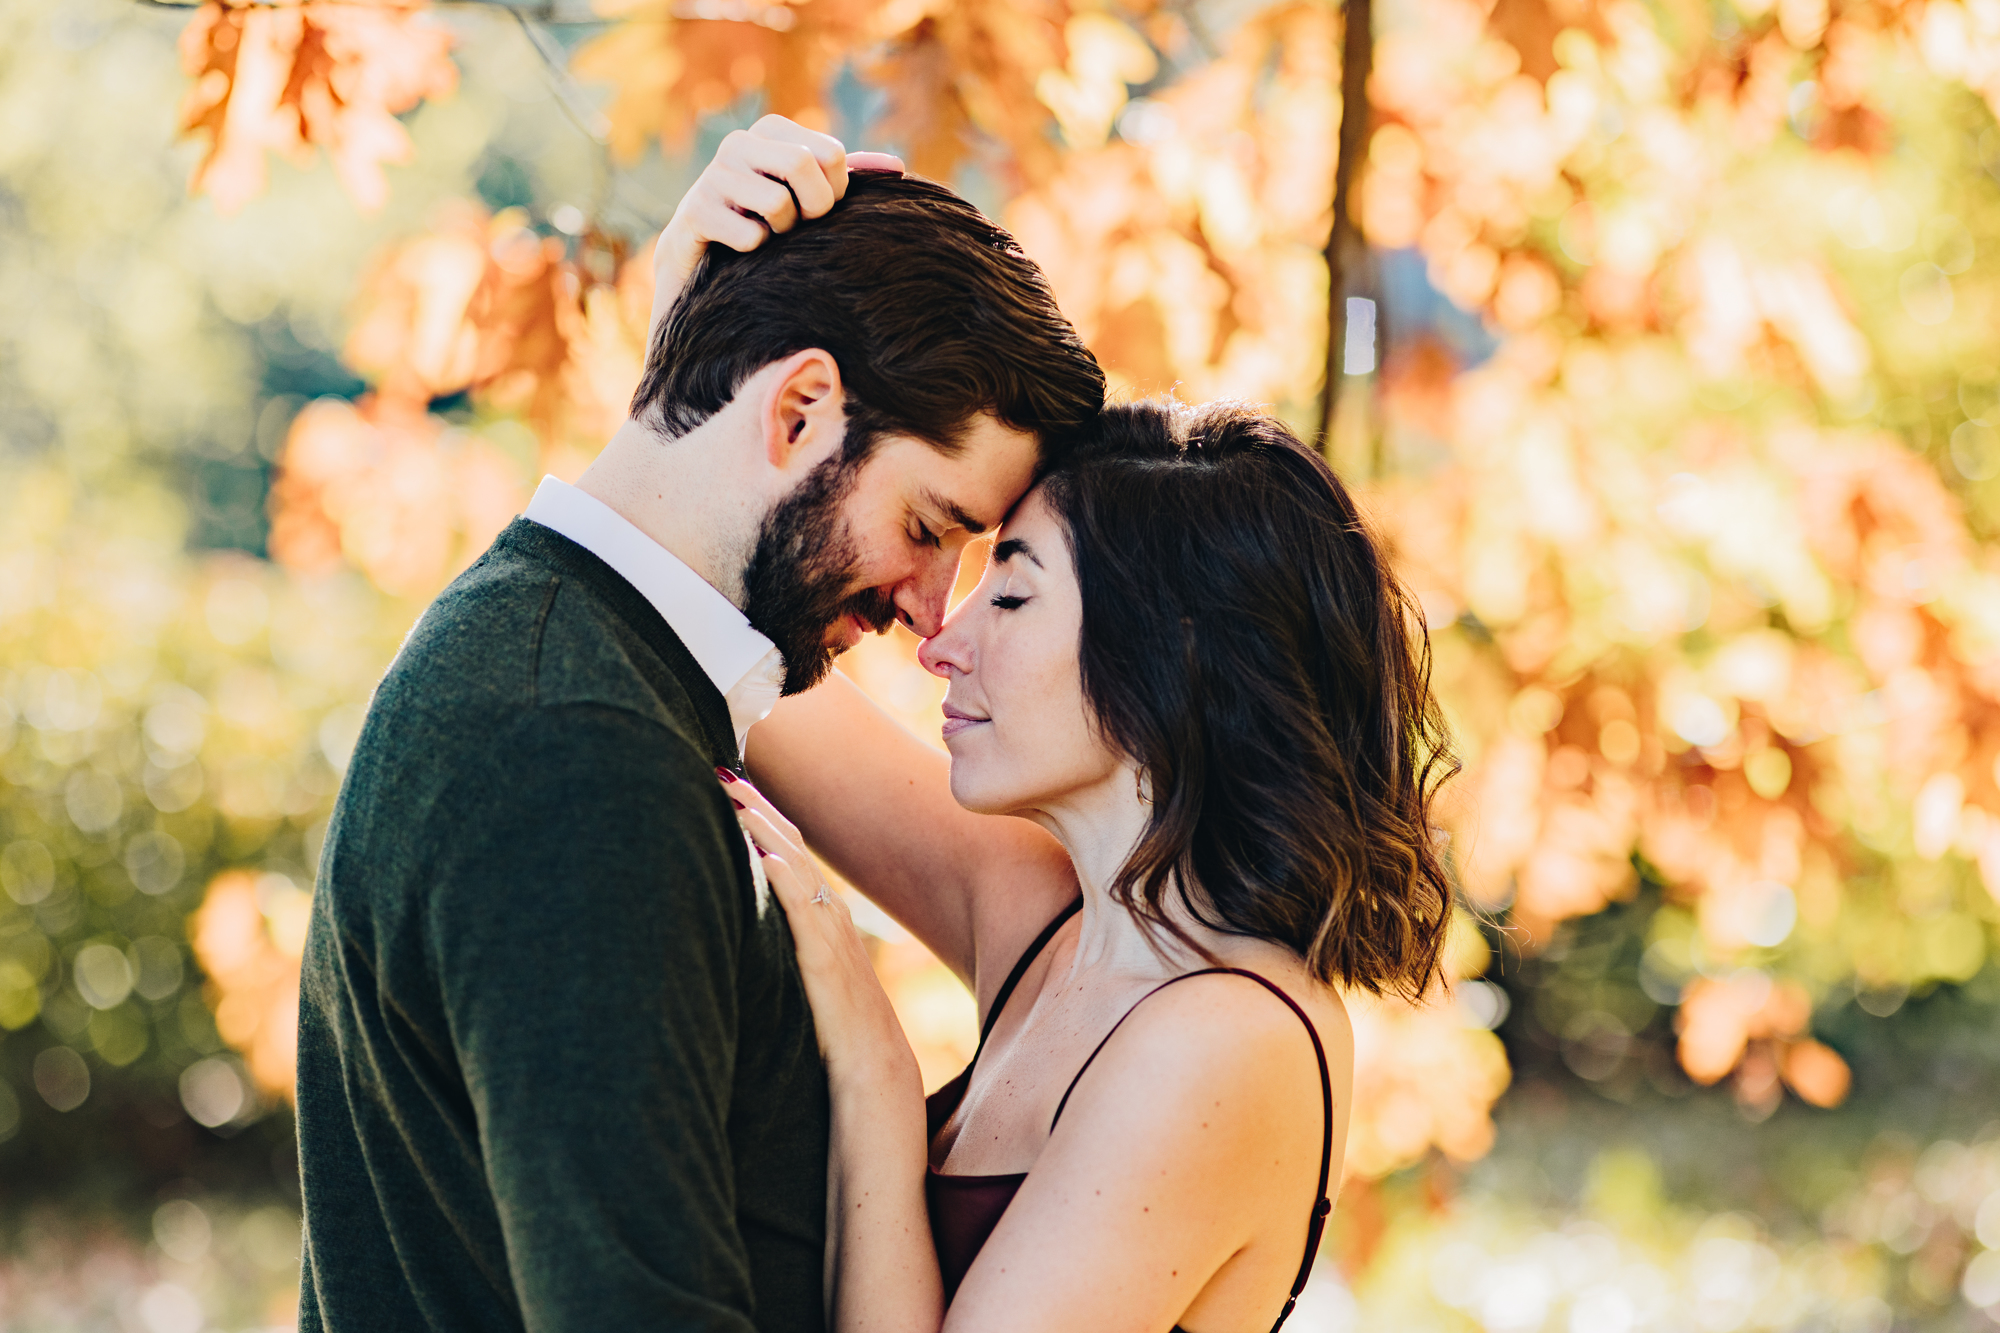 Emotional Central Park Engagement Photos in Fall